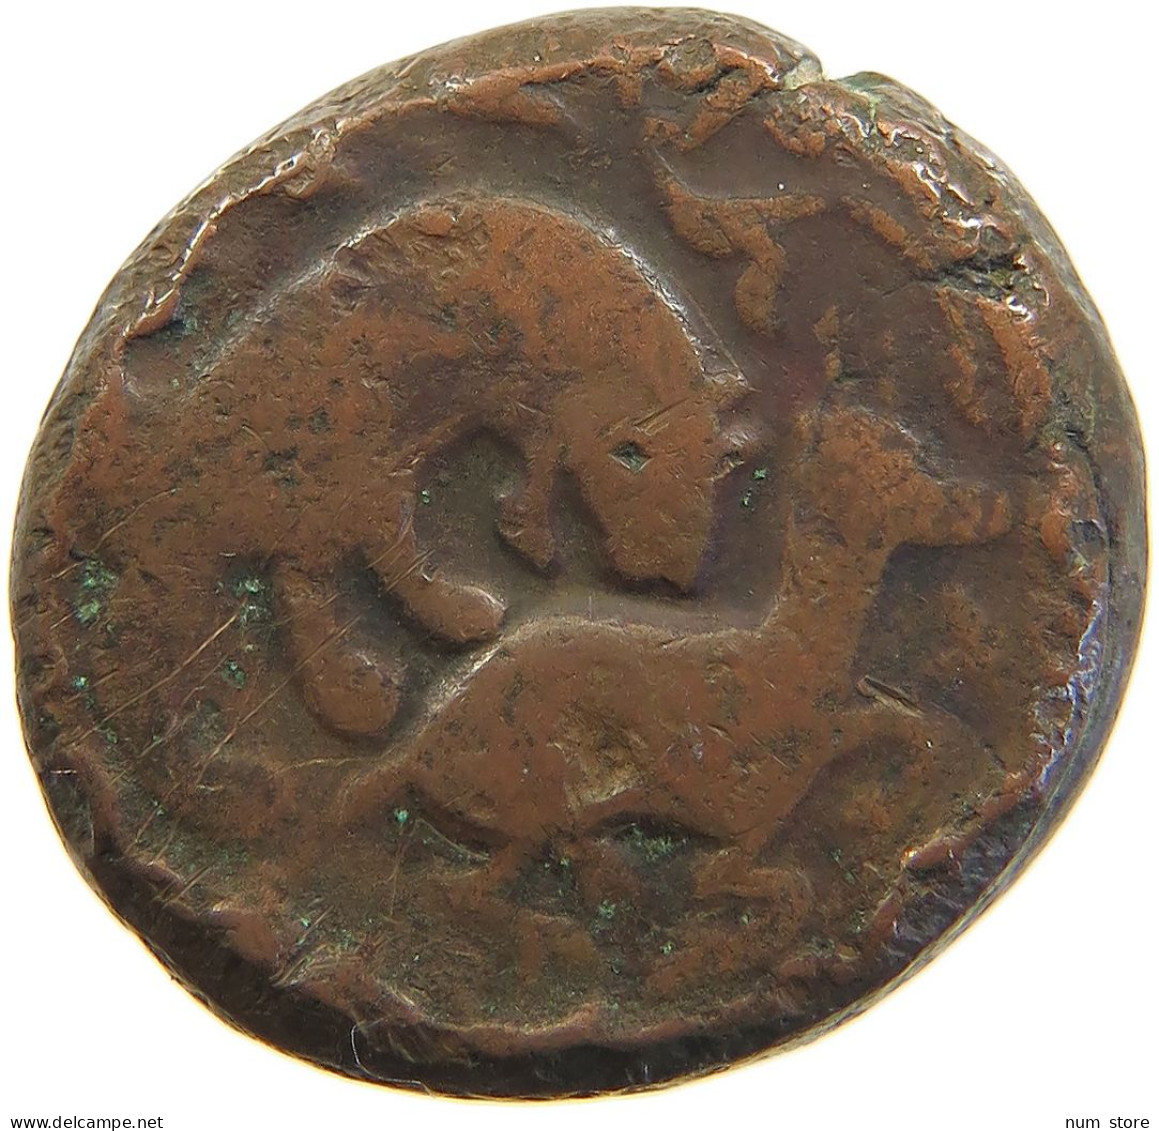 ISLAMIC FALUS FALS LION ATACKING DEER FIGURATIVE COINAGES IRAN / PERSIA / AFGHANISTAN 24MM 18.5G #t034 0095 - Irán